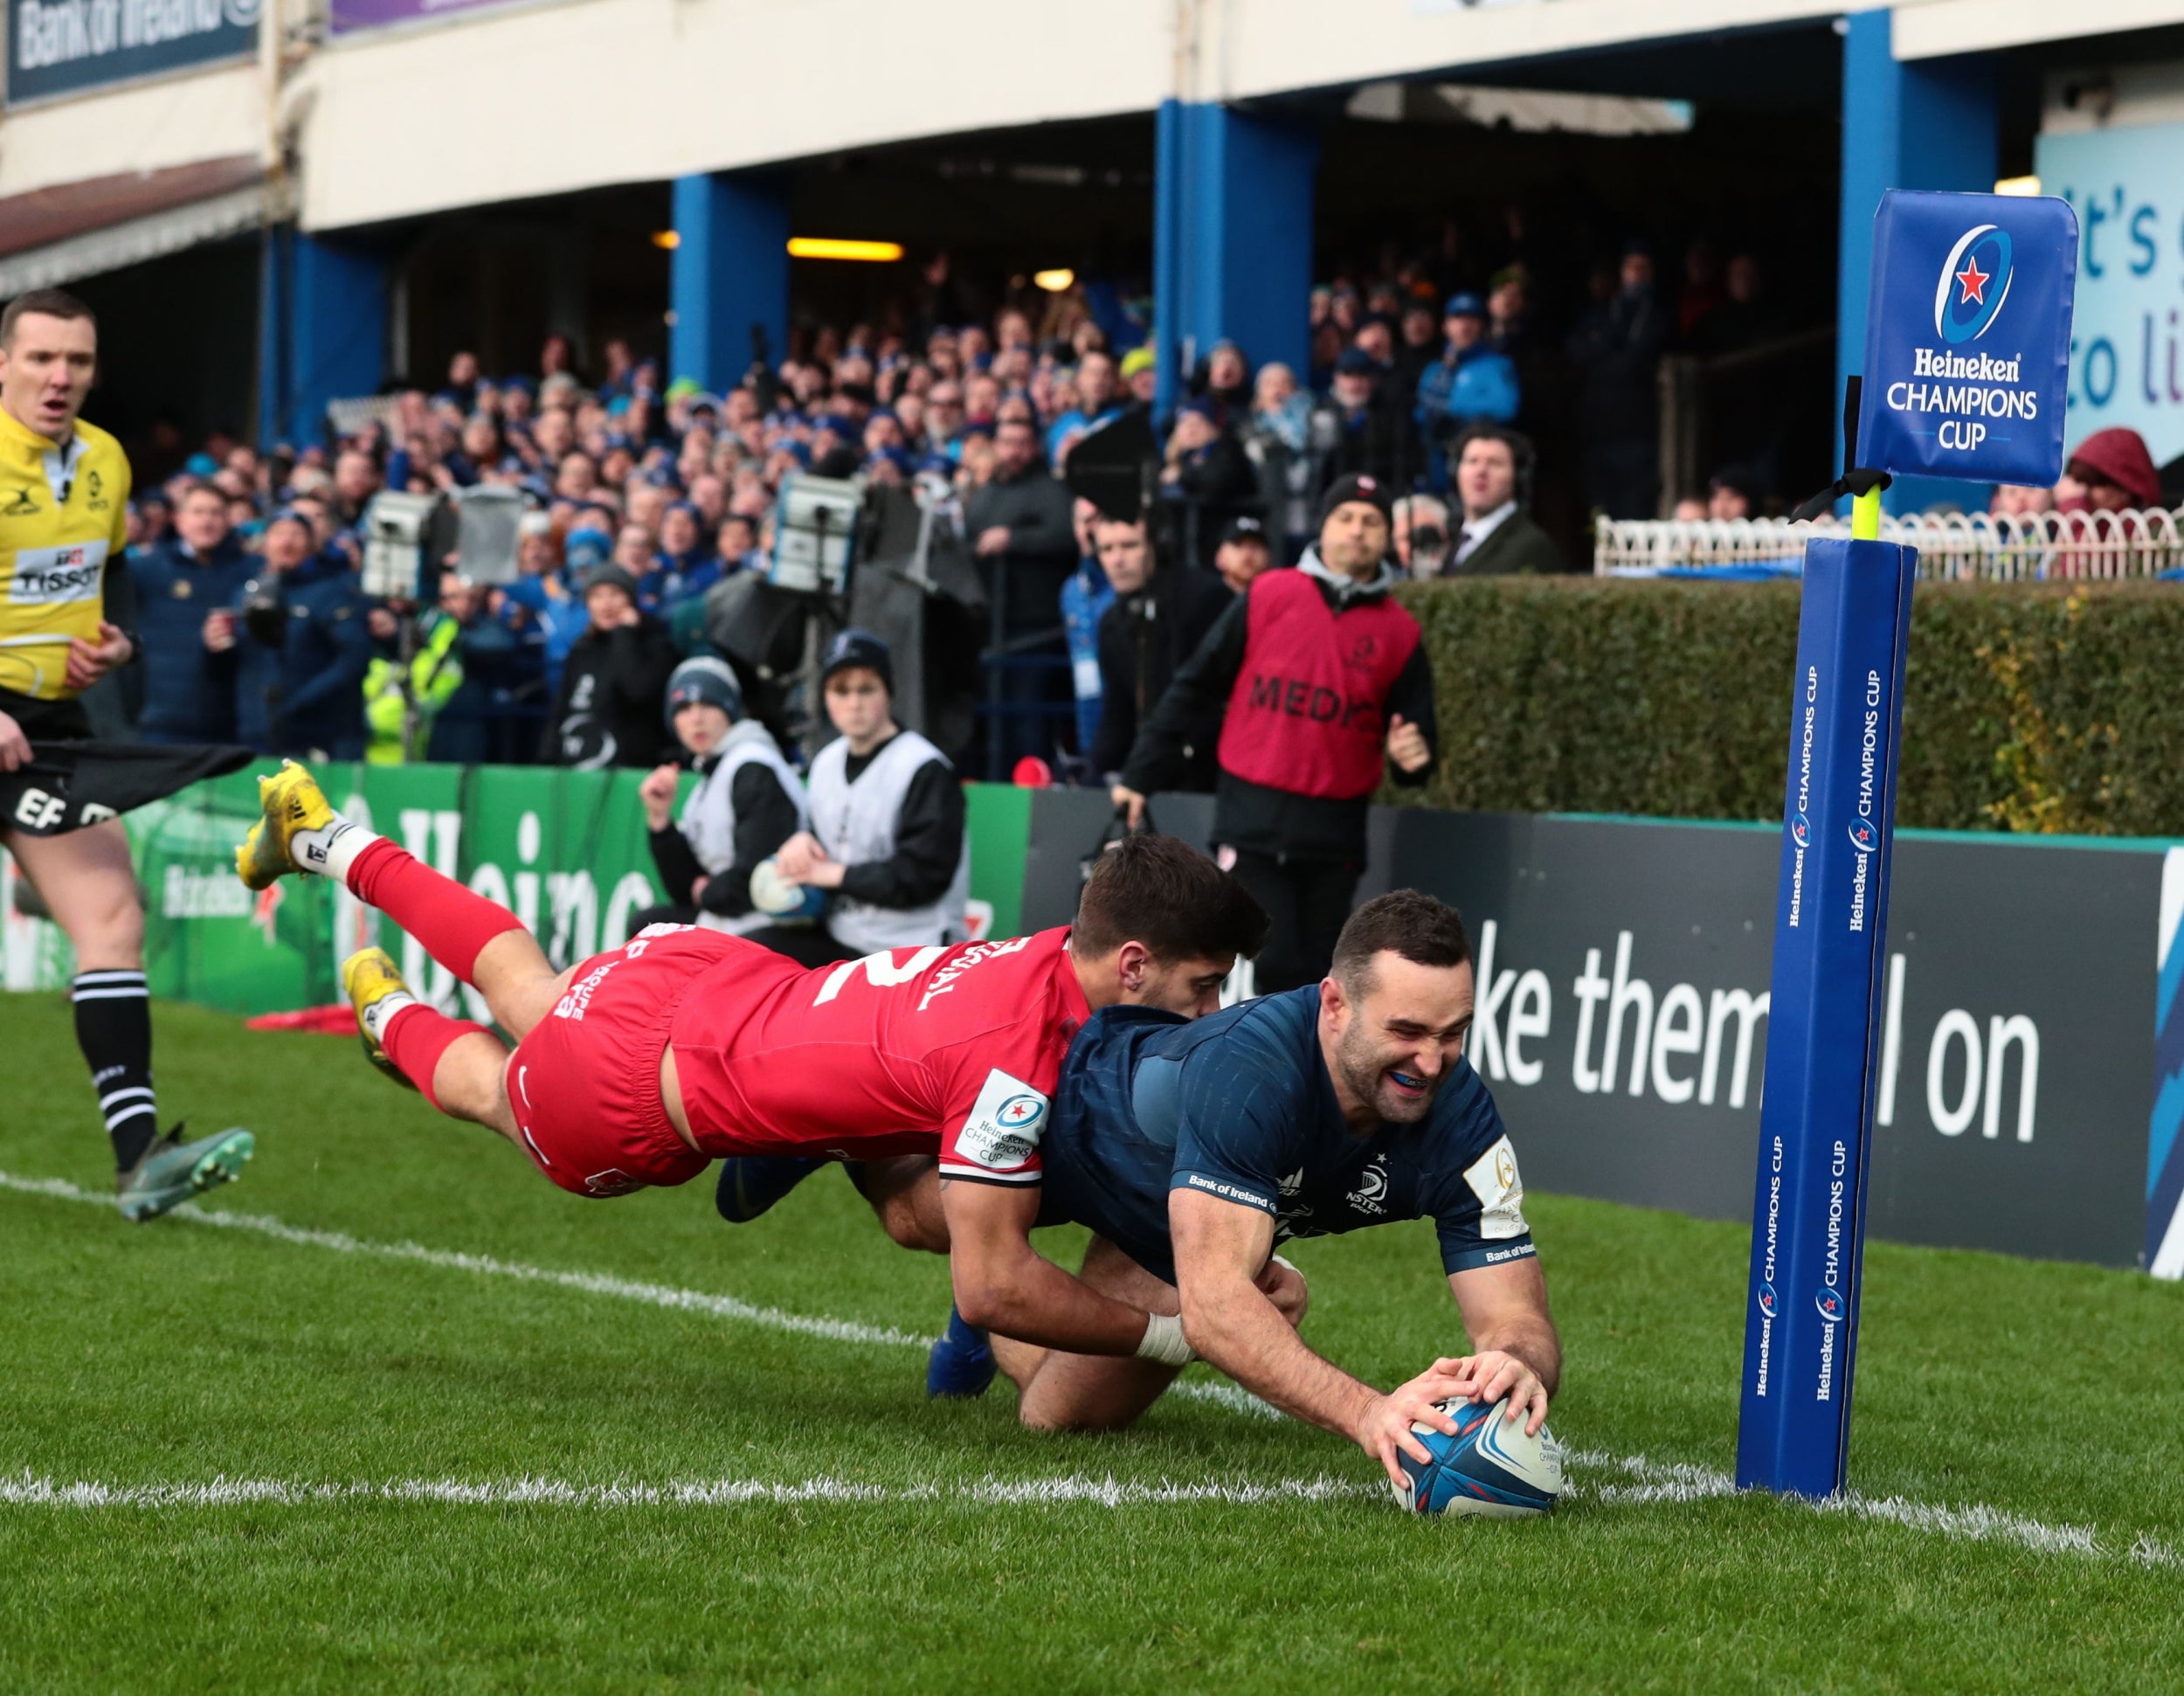 Dave Kearney scores a try in Leinster's win over Toulouse